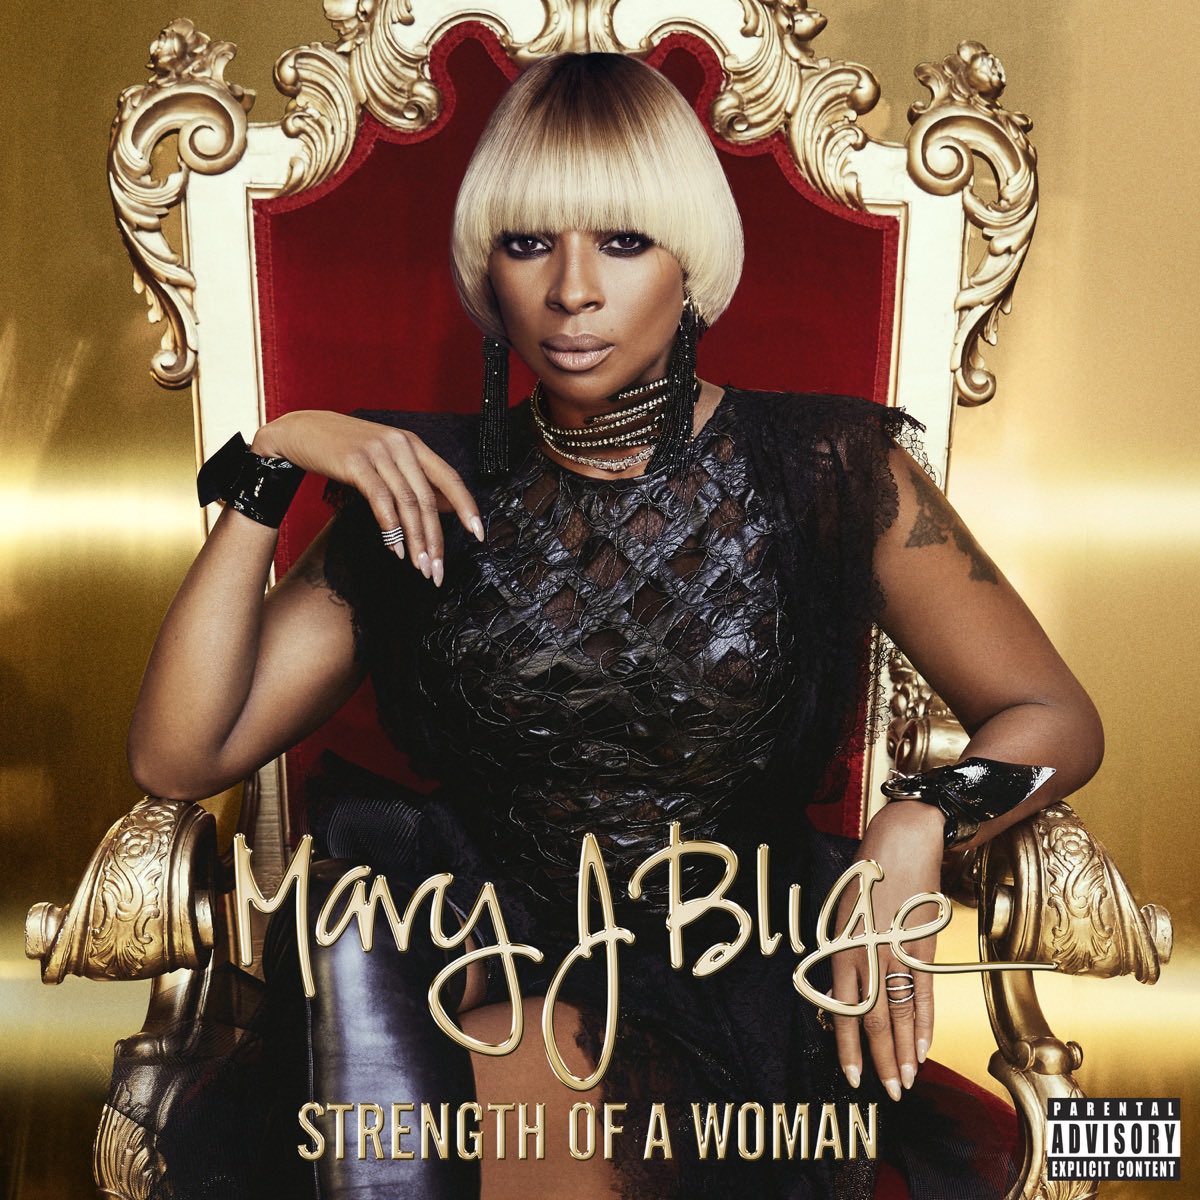 Happy 7th birthday to Mary J. Blige’s album “Strength Of A Woman,” released on April 28, 2017!

What song did you wear out on this MJB album?

#MaryJBlige #StrengthOfAWoman #StrengthOfAWoman7 #SoulBounce